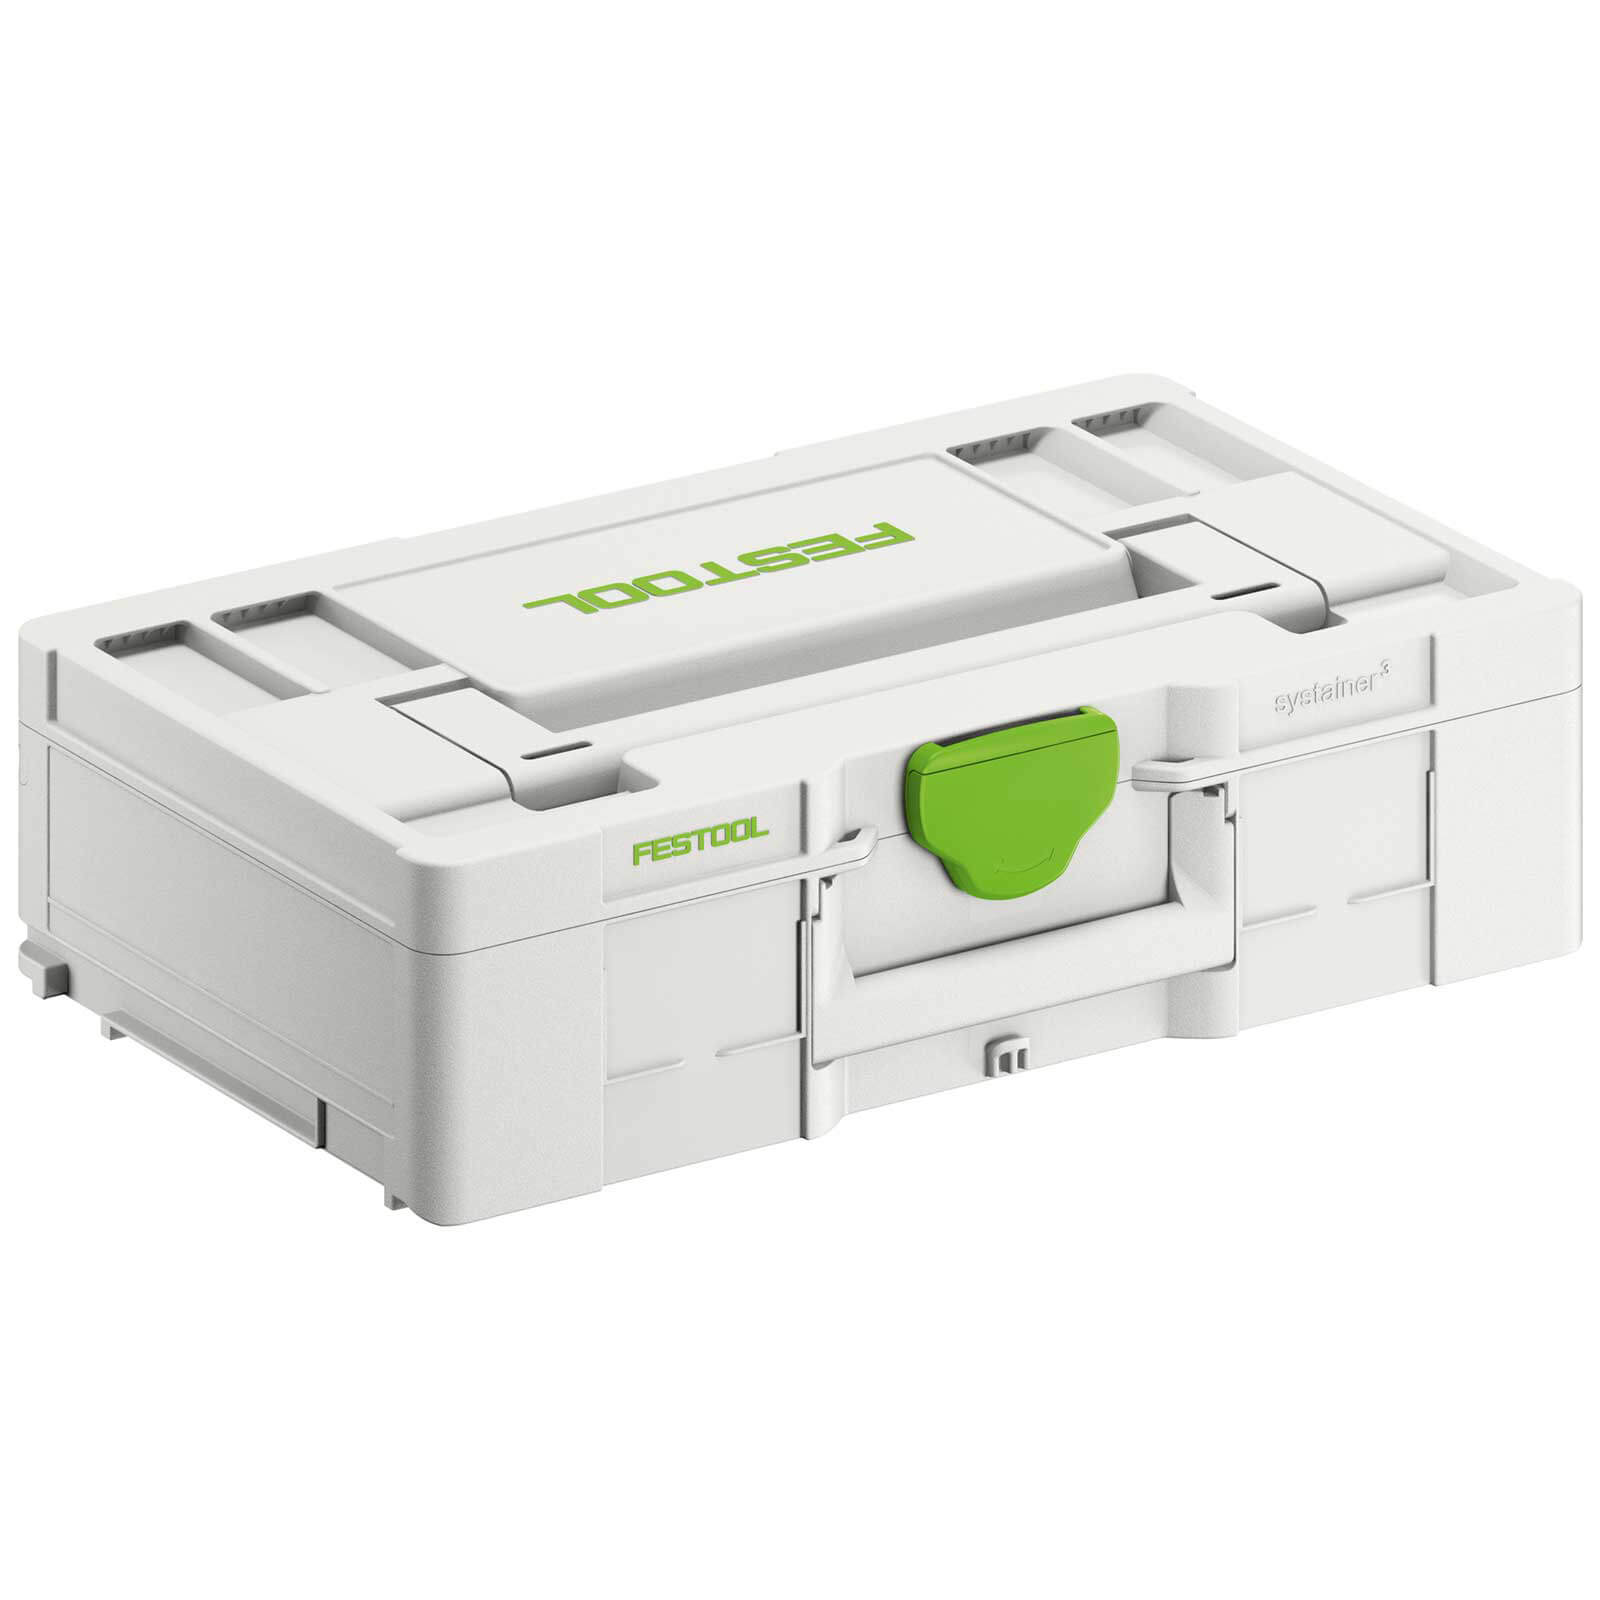 Photo of Festool Systainer Sys3 L 137 Tool Case